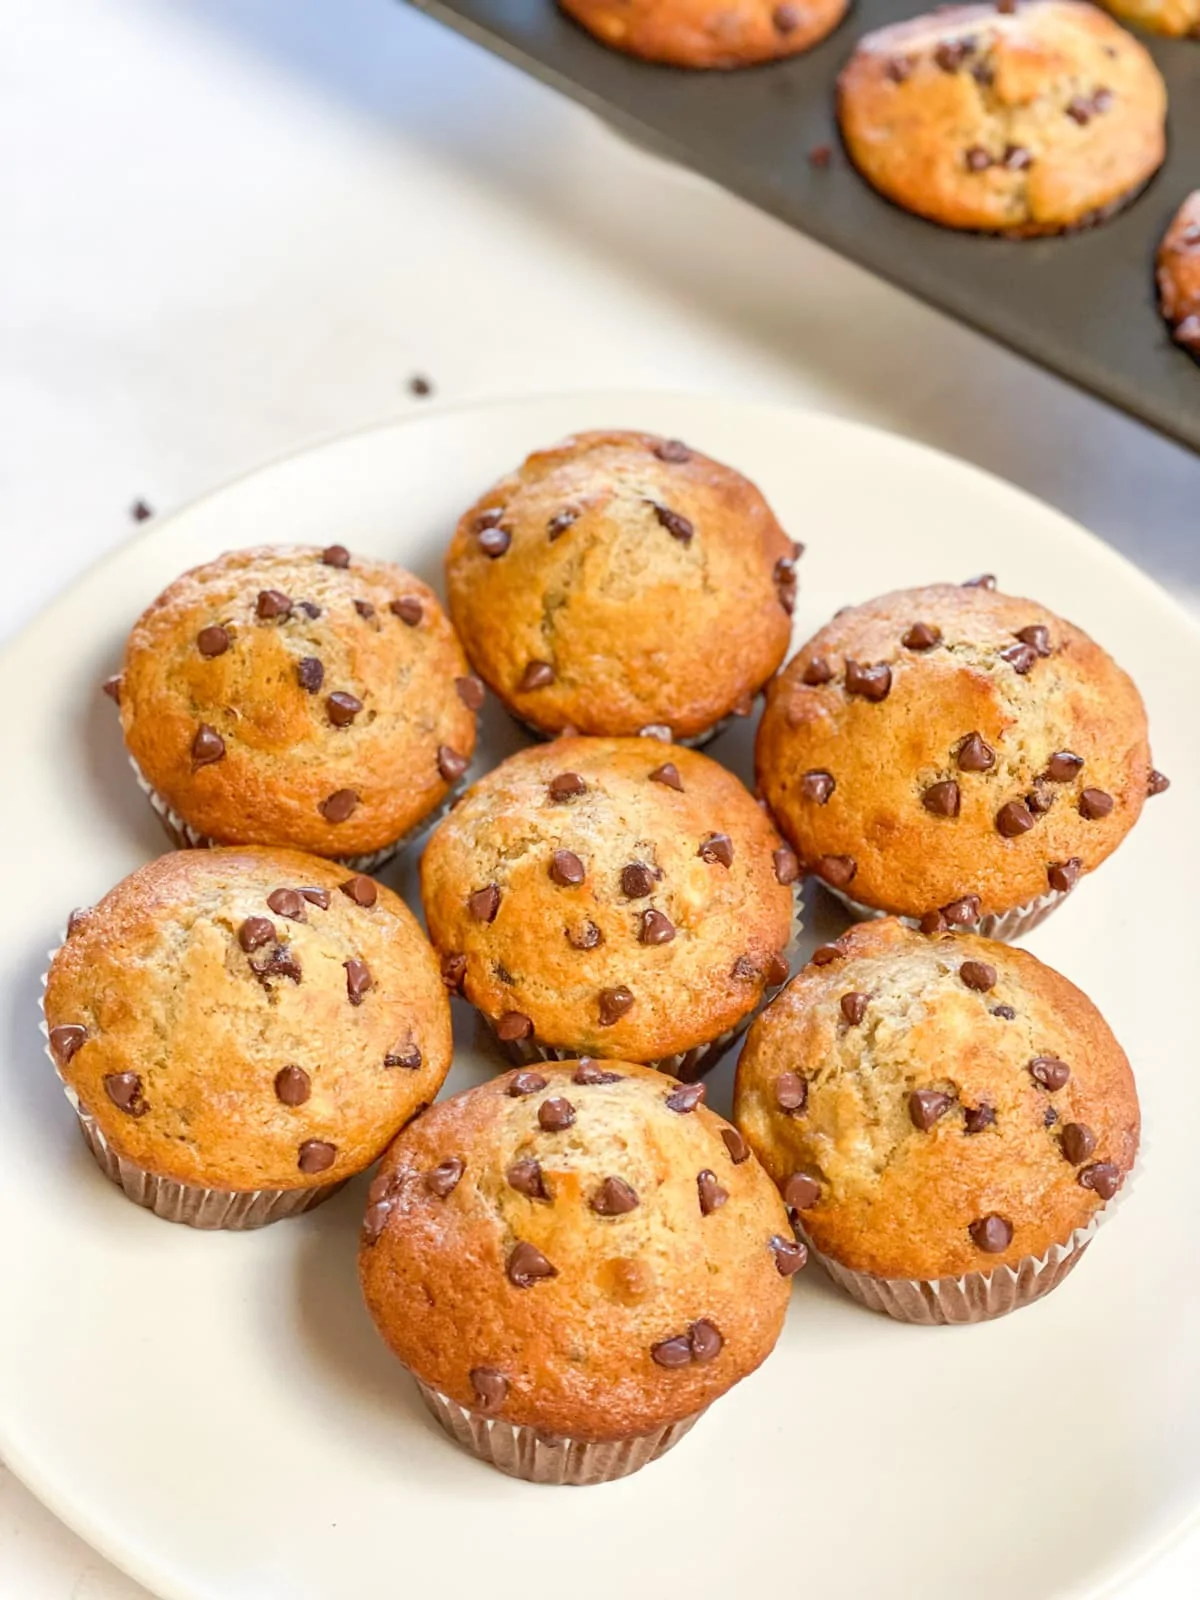 Perfectly baked easy banana and chocolate chip muffins in a plate 